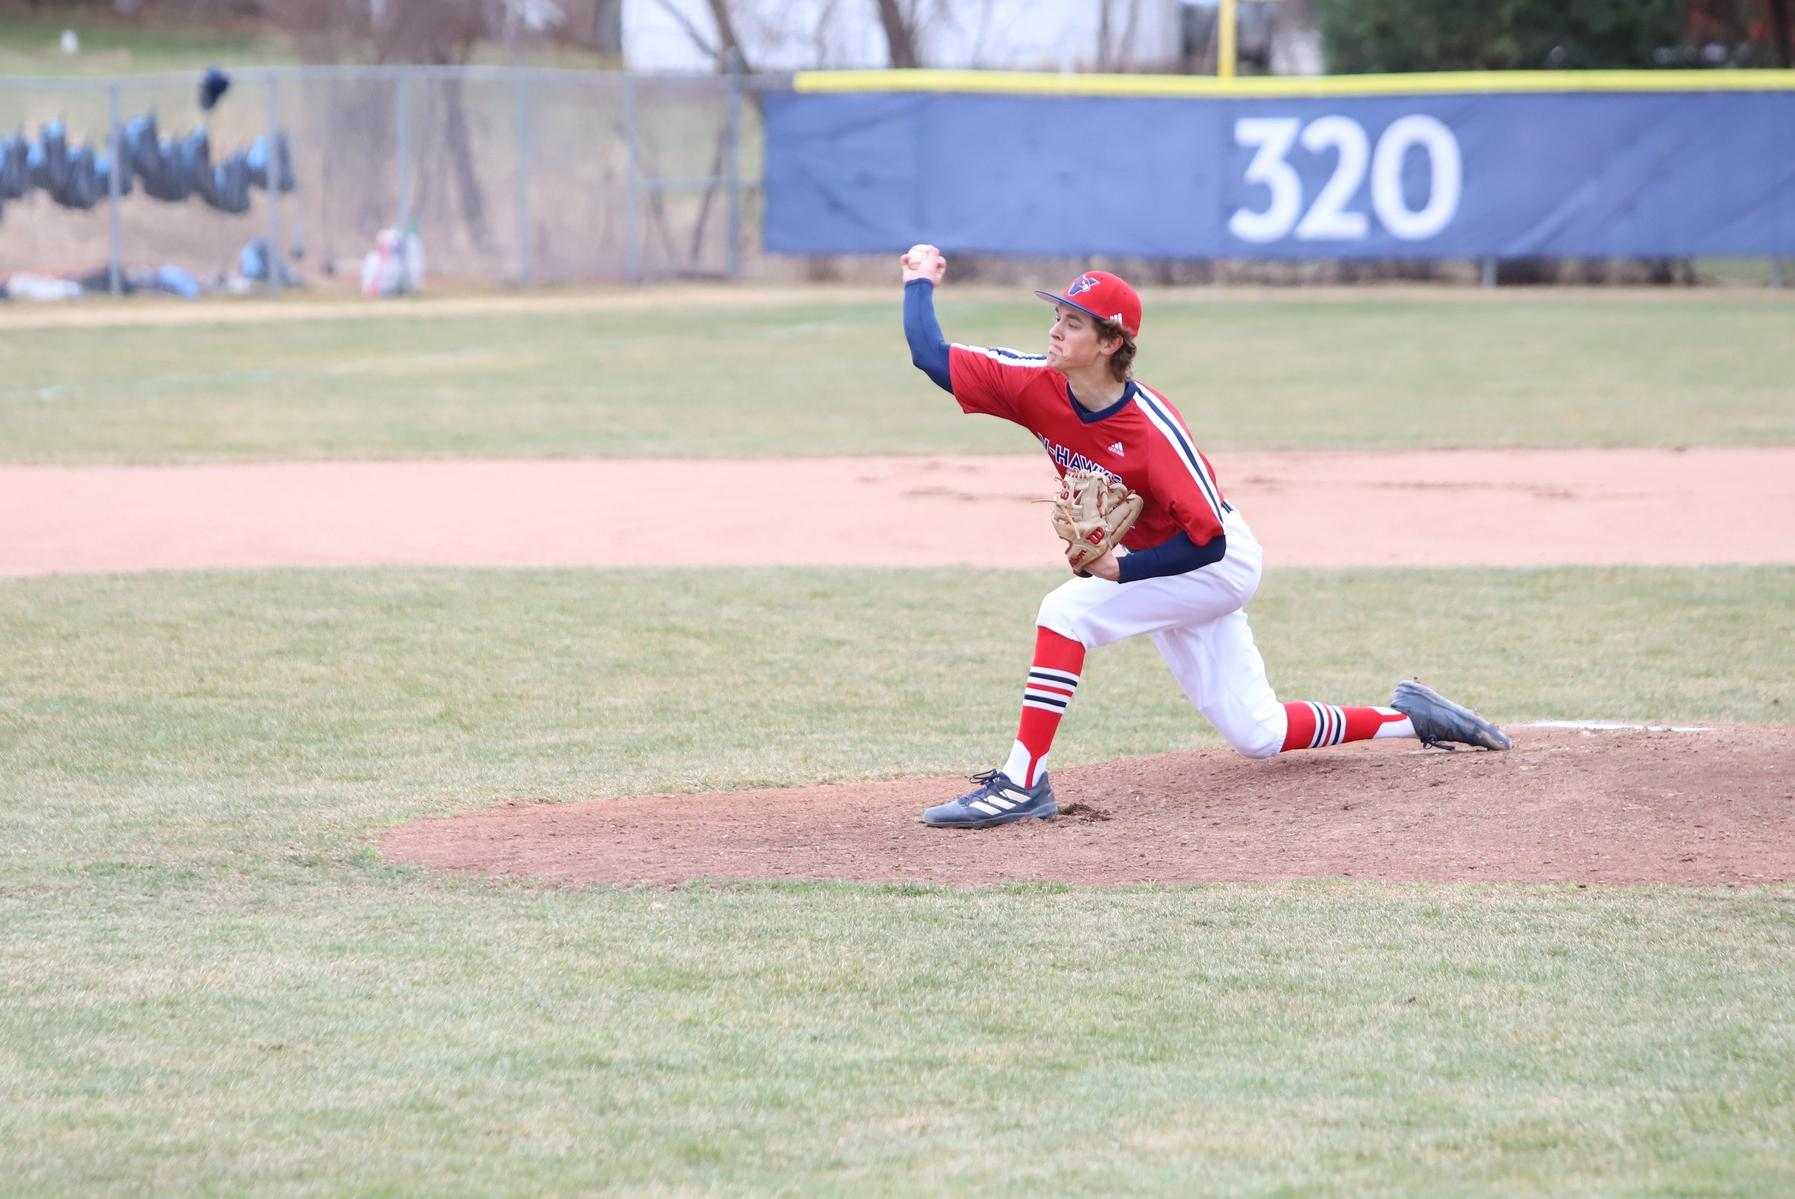 V-Hawks Cap Series with Dominant Win